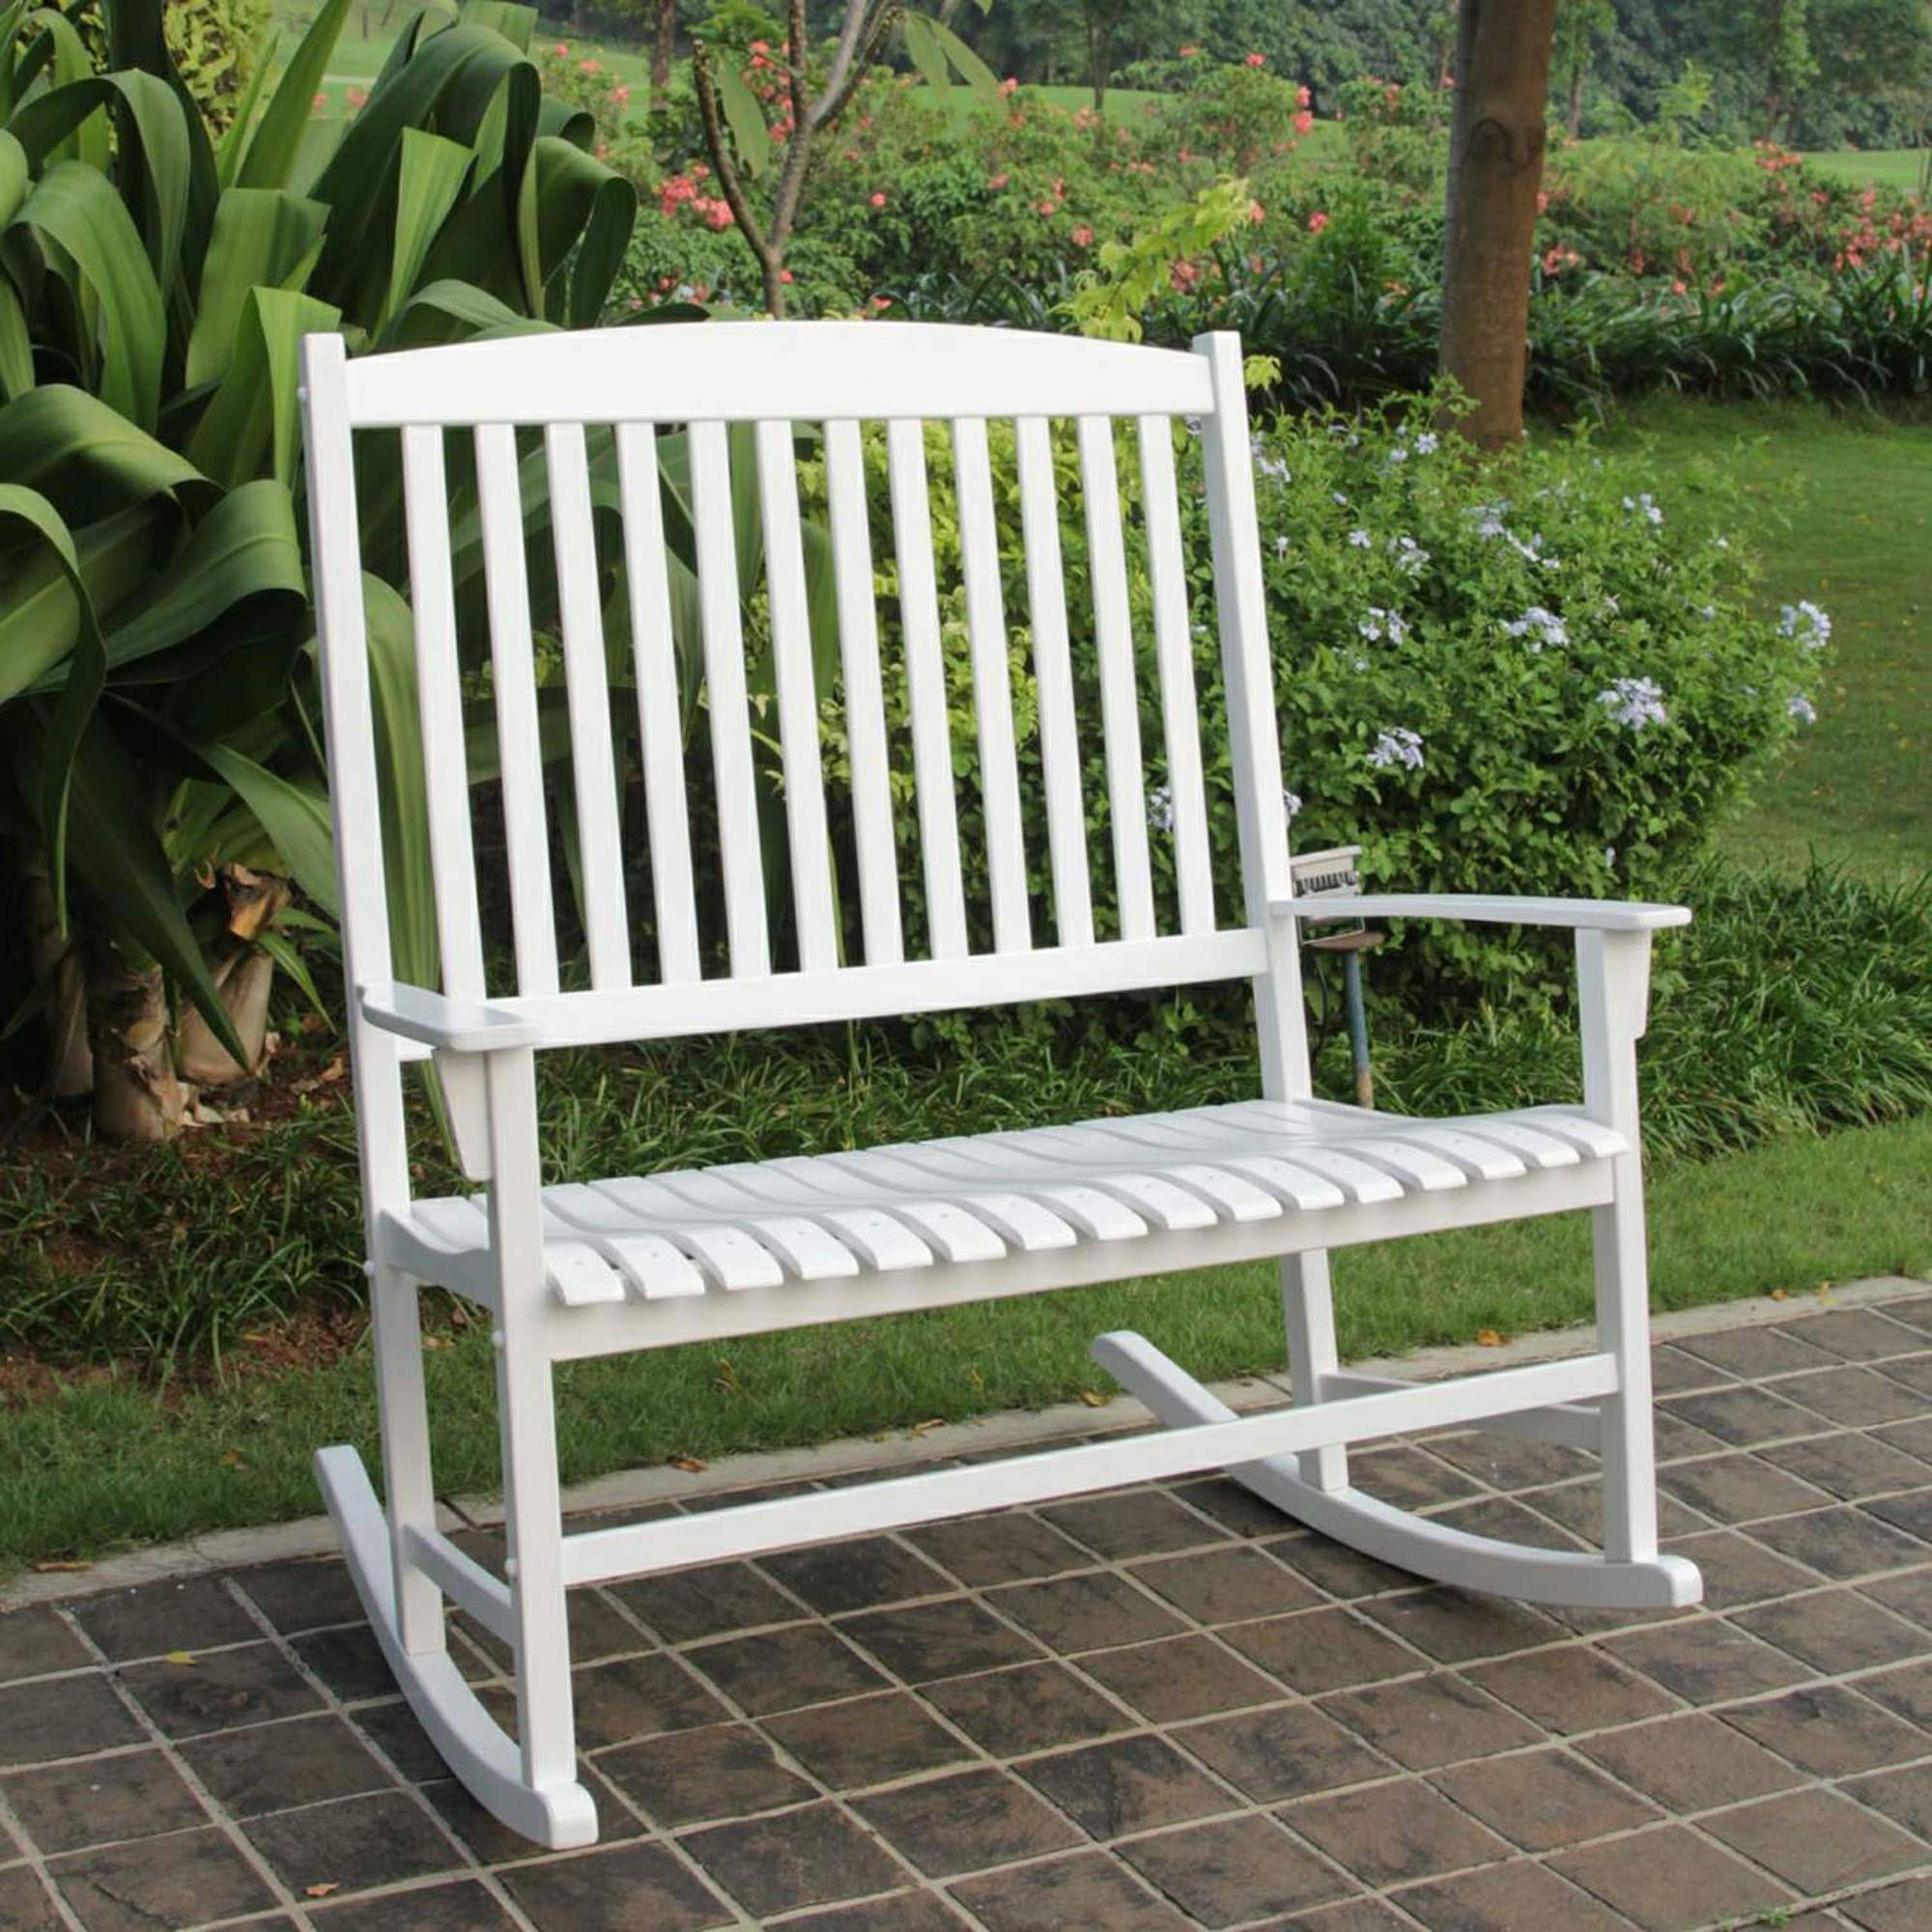 Wooden Patio Rocking Chairs For Most Recent Mainstays Outdoor Double Rocking Chair White Solid Hardwood Wide (View 12 of 15)